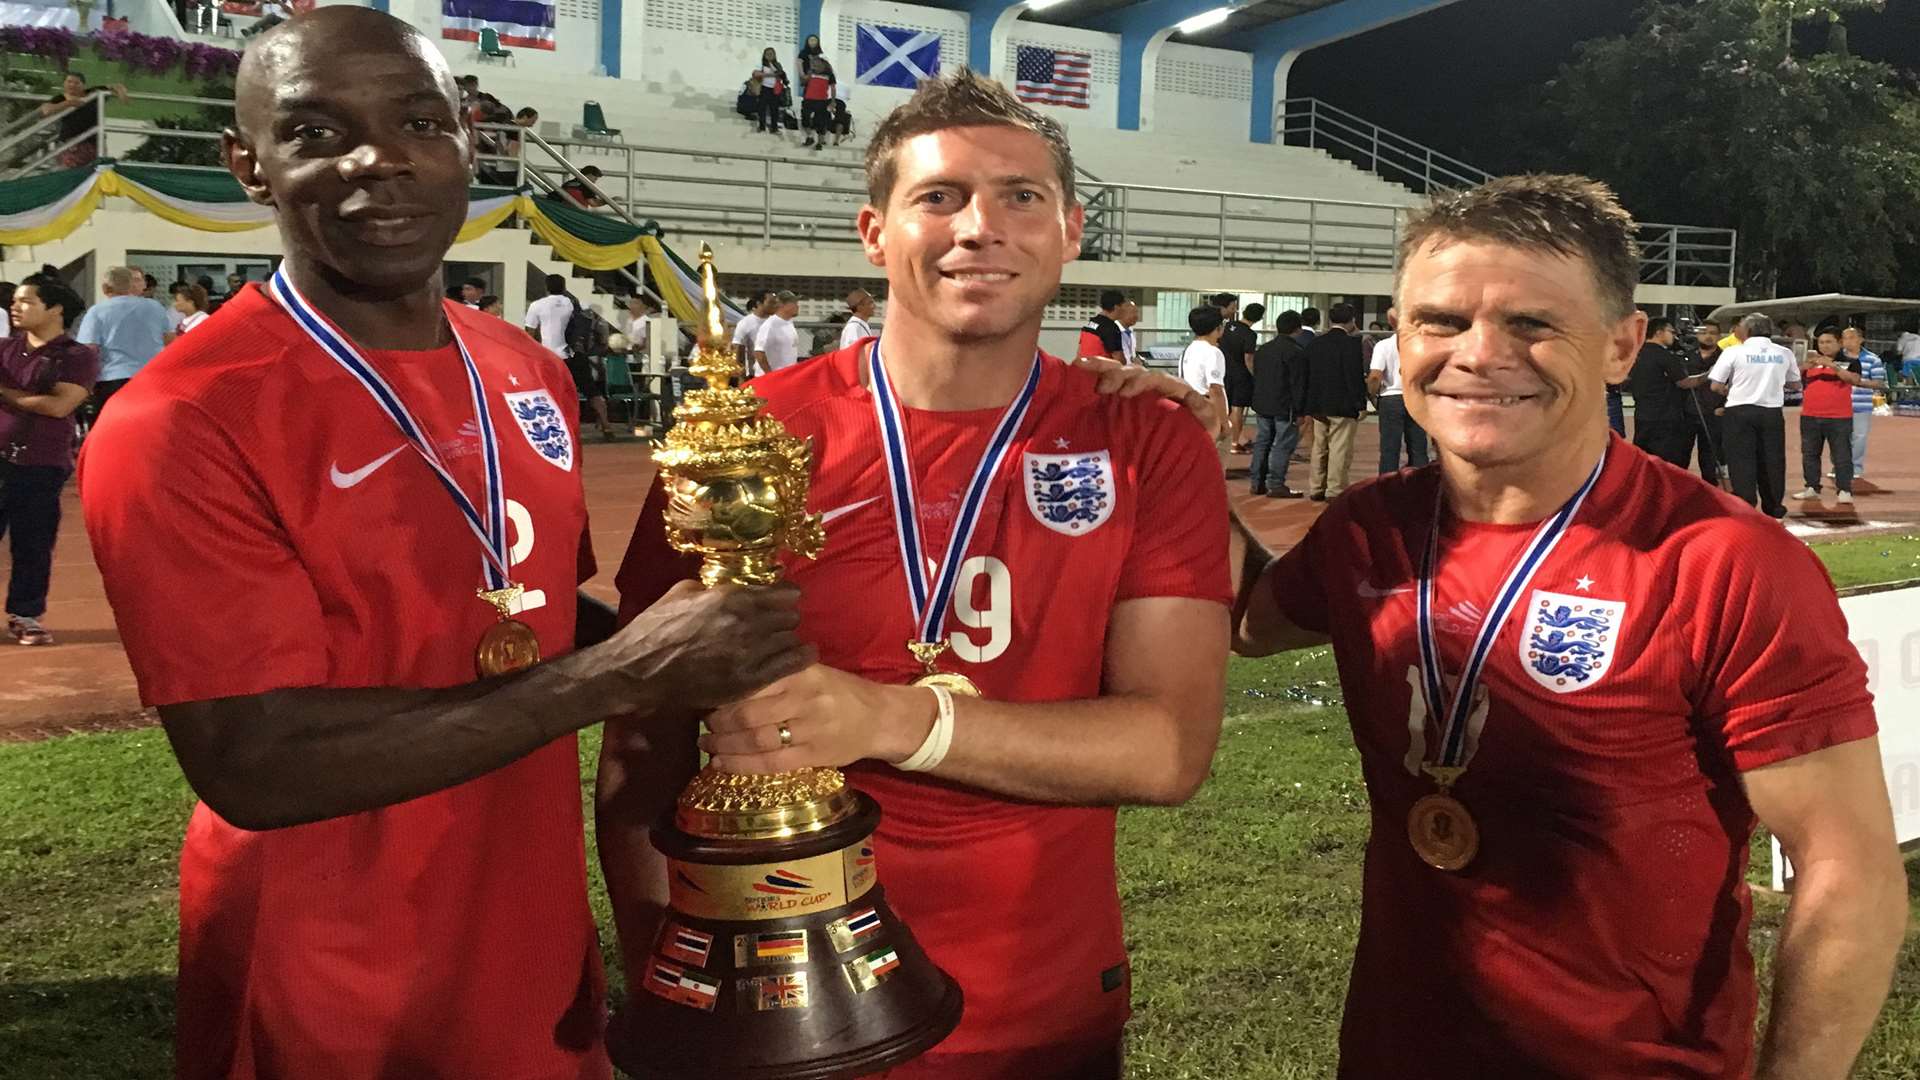 Former Gills stars Ian Cox, Nicky Southall and Andy Hessenthaler with the Seniors World Cup